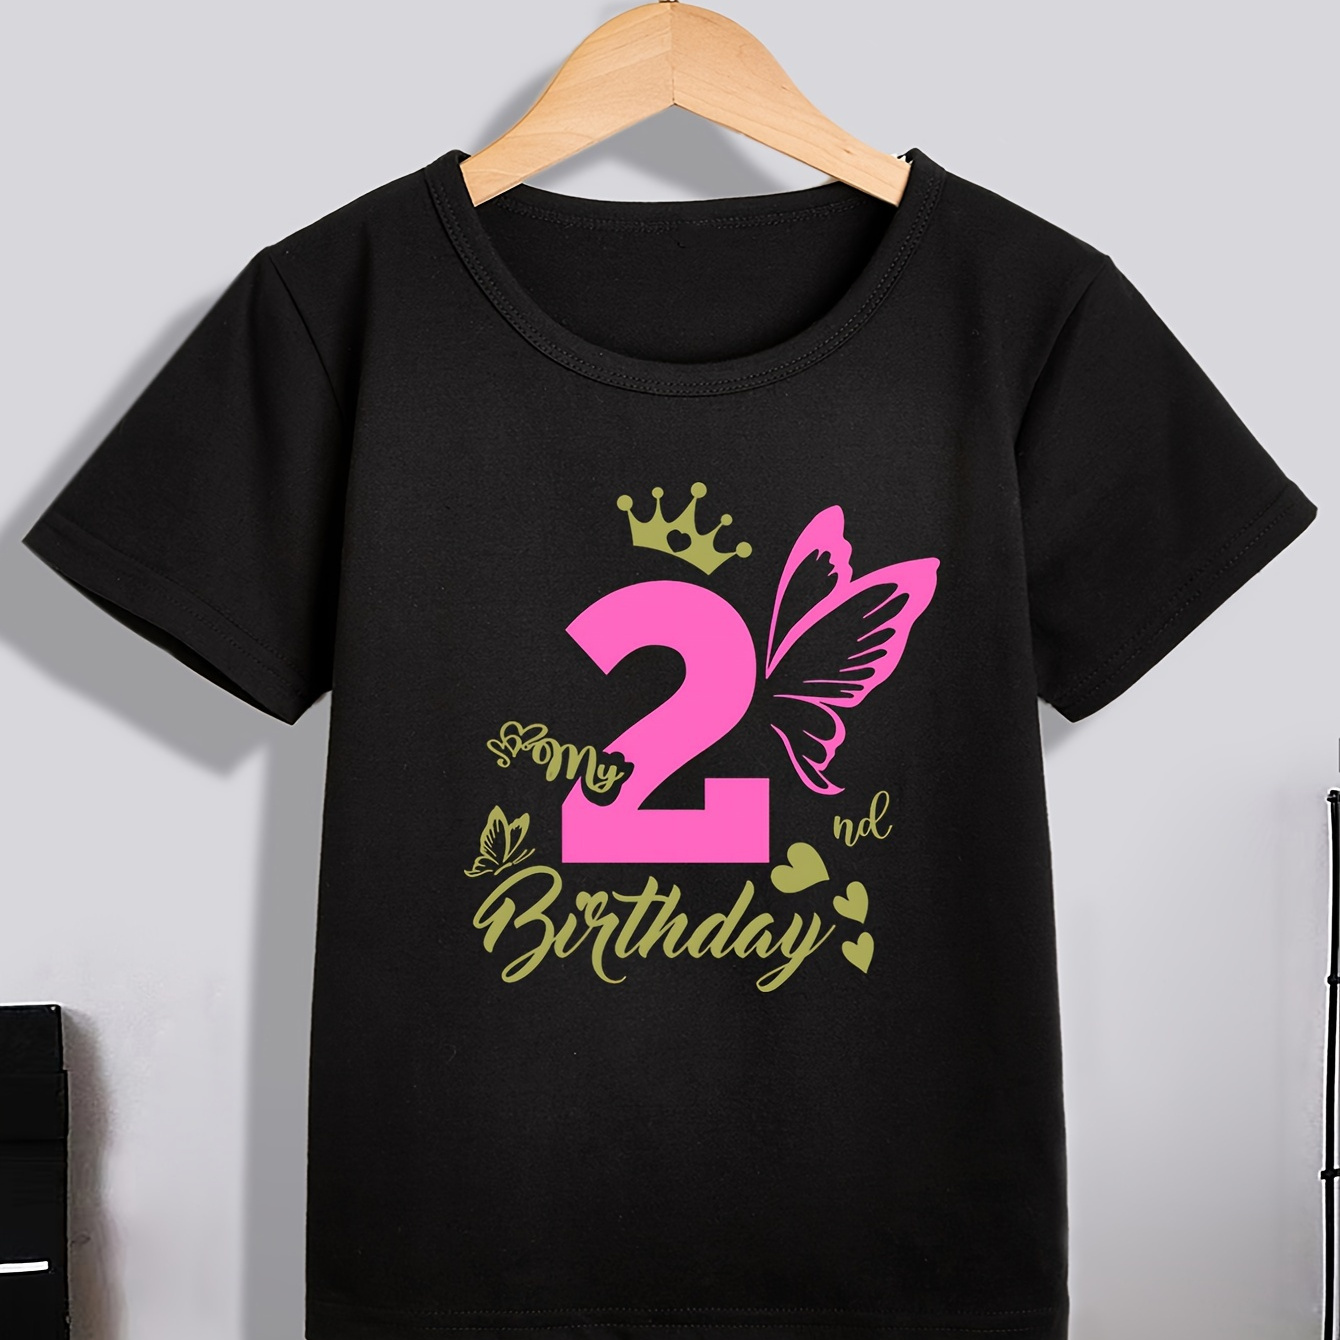 

Birthday "it's My 2nd Birthday" Letter Print Creative T-shirts, Soft & Elastic Comfy Crew Neck Short Sleeve Tee, Girl's Summer Tops